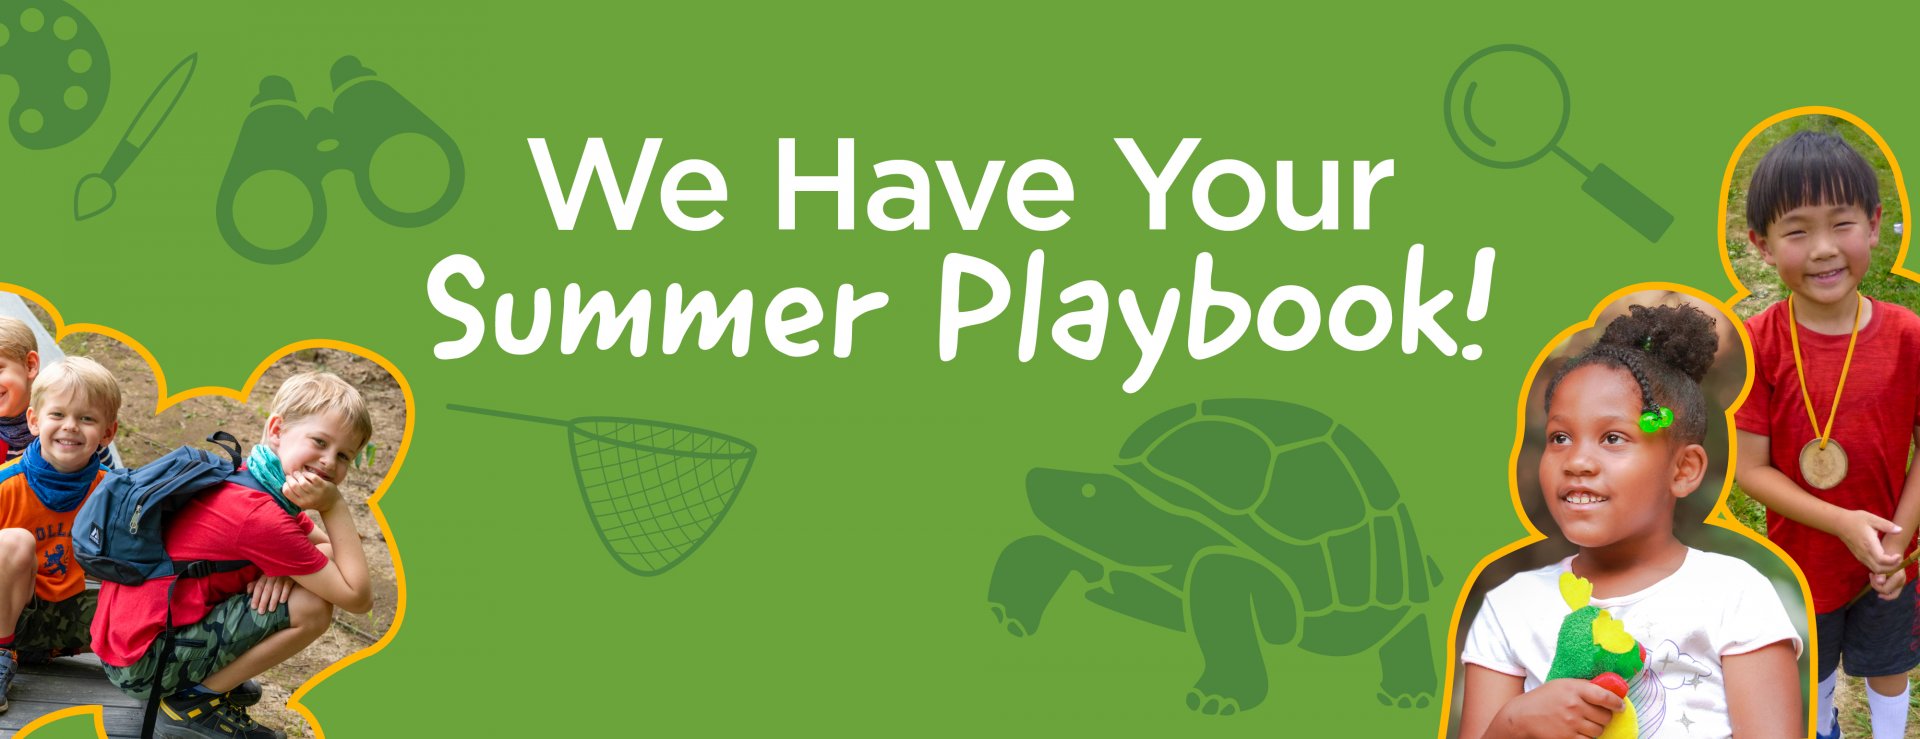 "We Have Your Summer Playbook!"